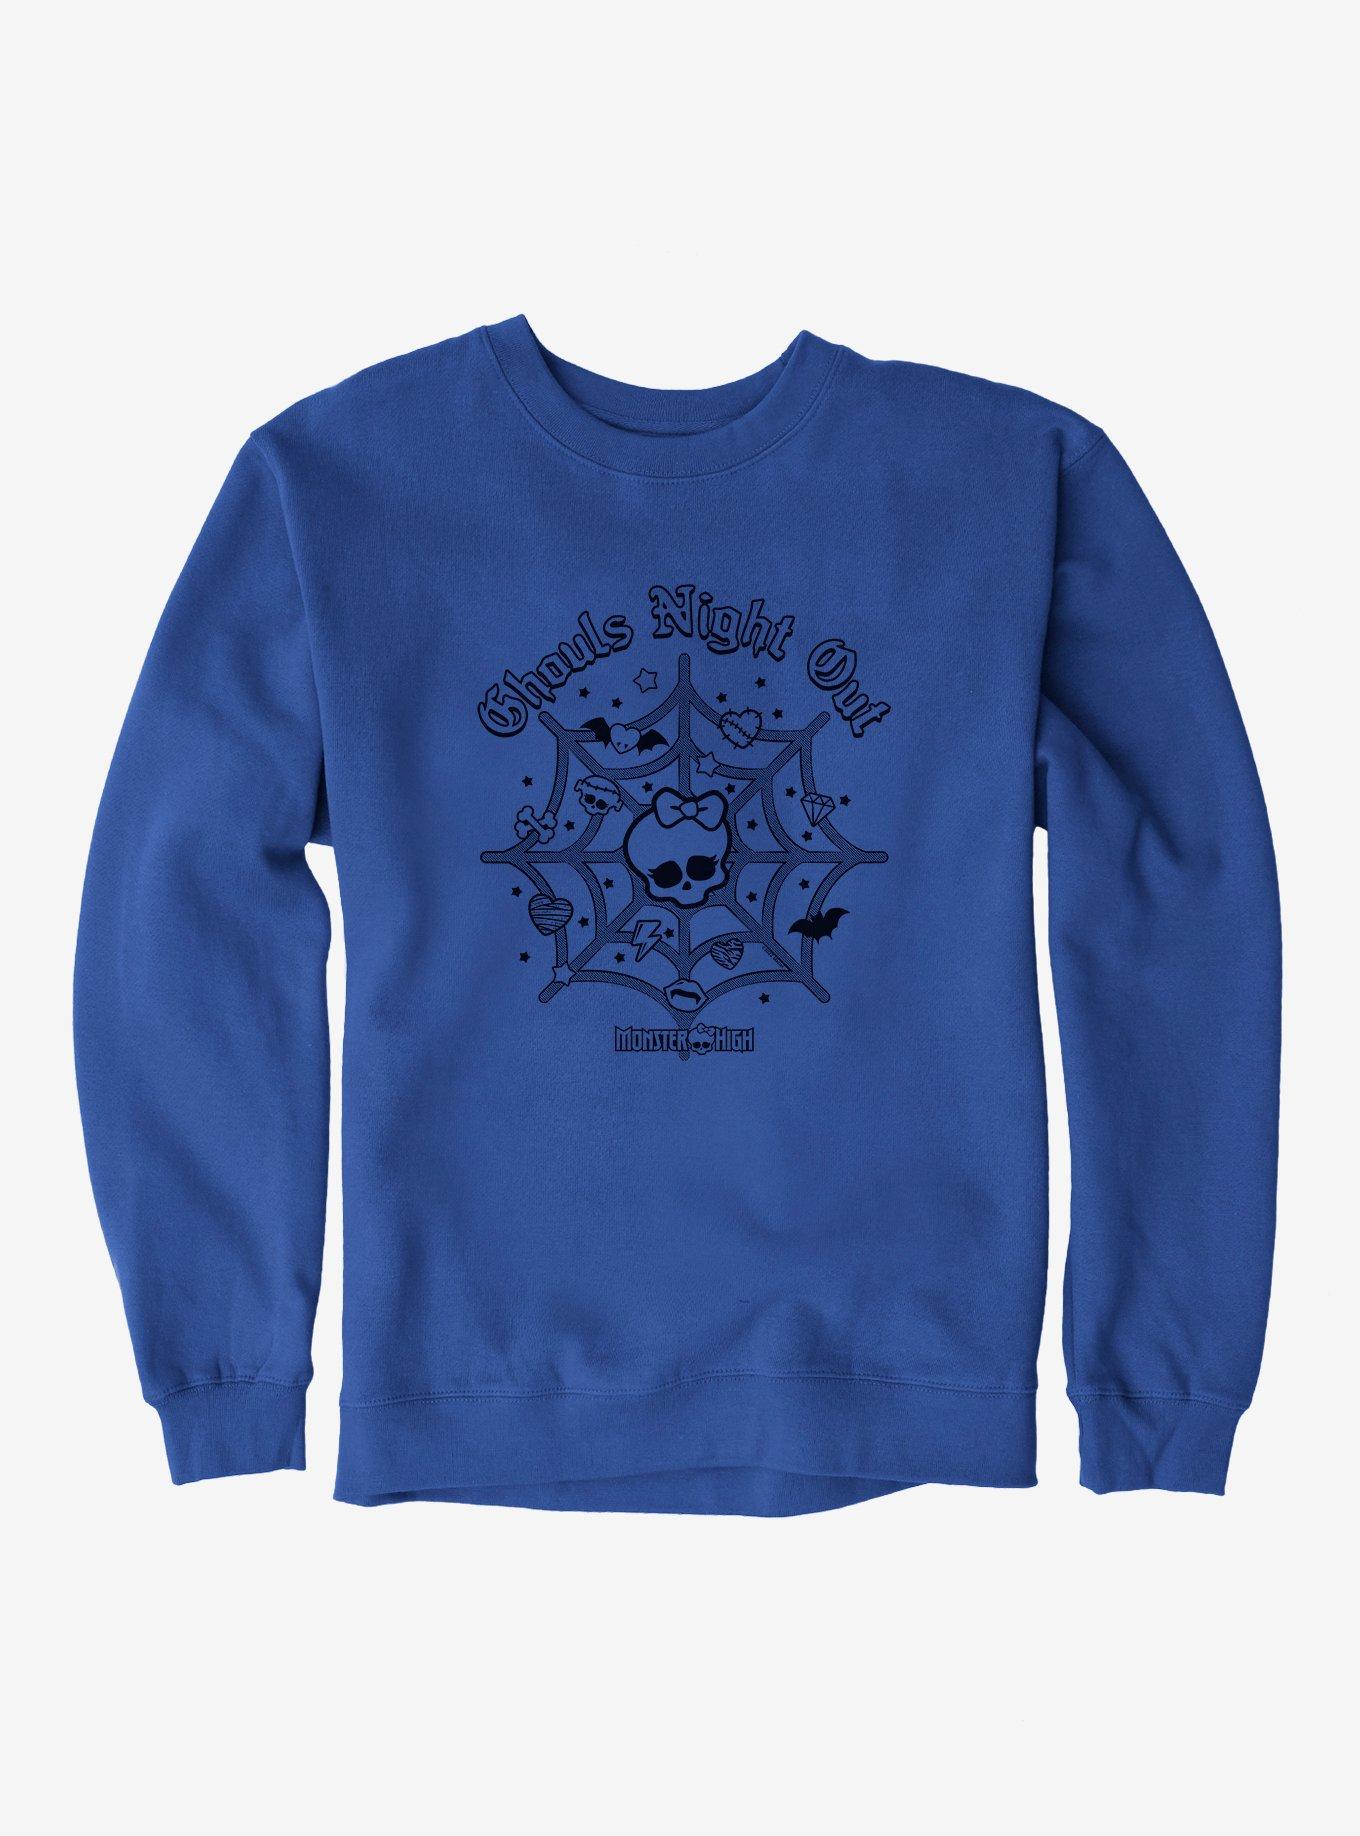 Monster High Ghouls Night Out Spiderweb Sweatshirt, ROYAL BLUE, hi-res